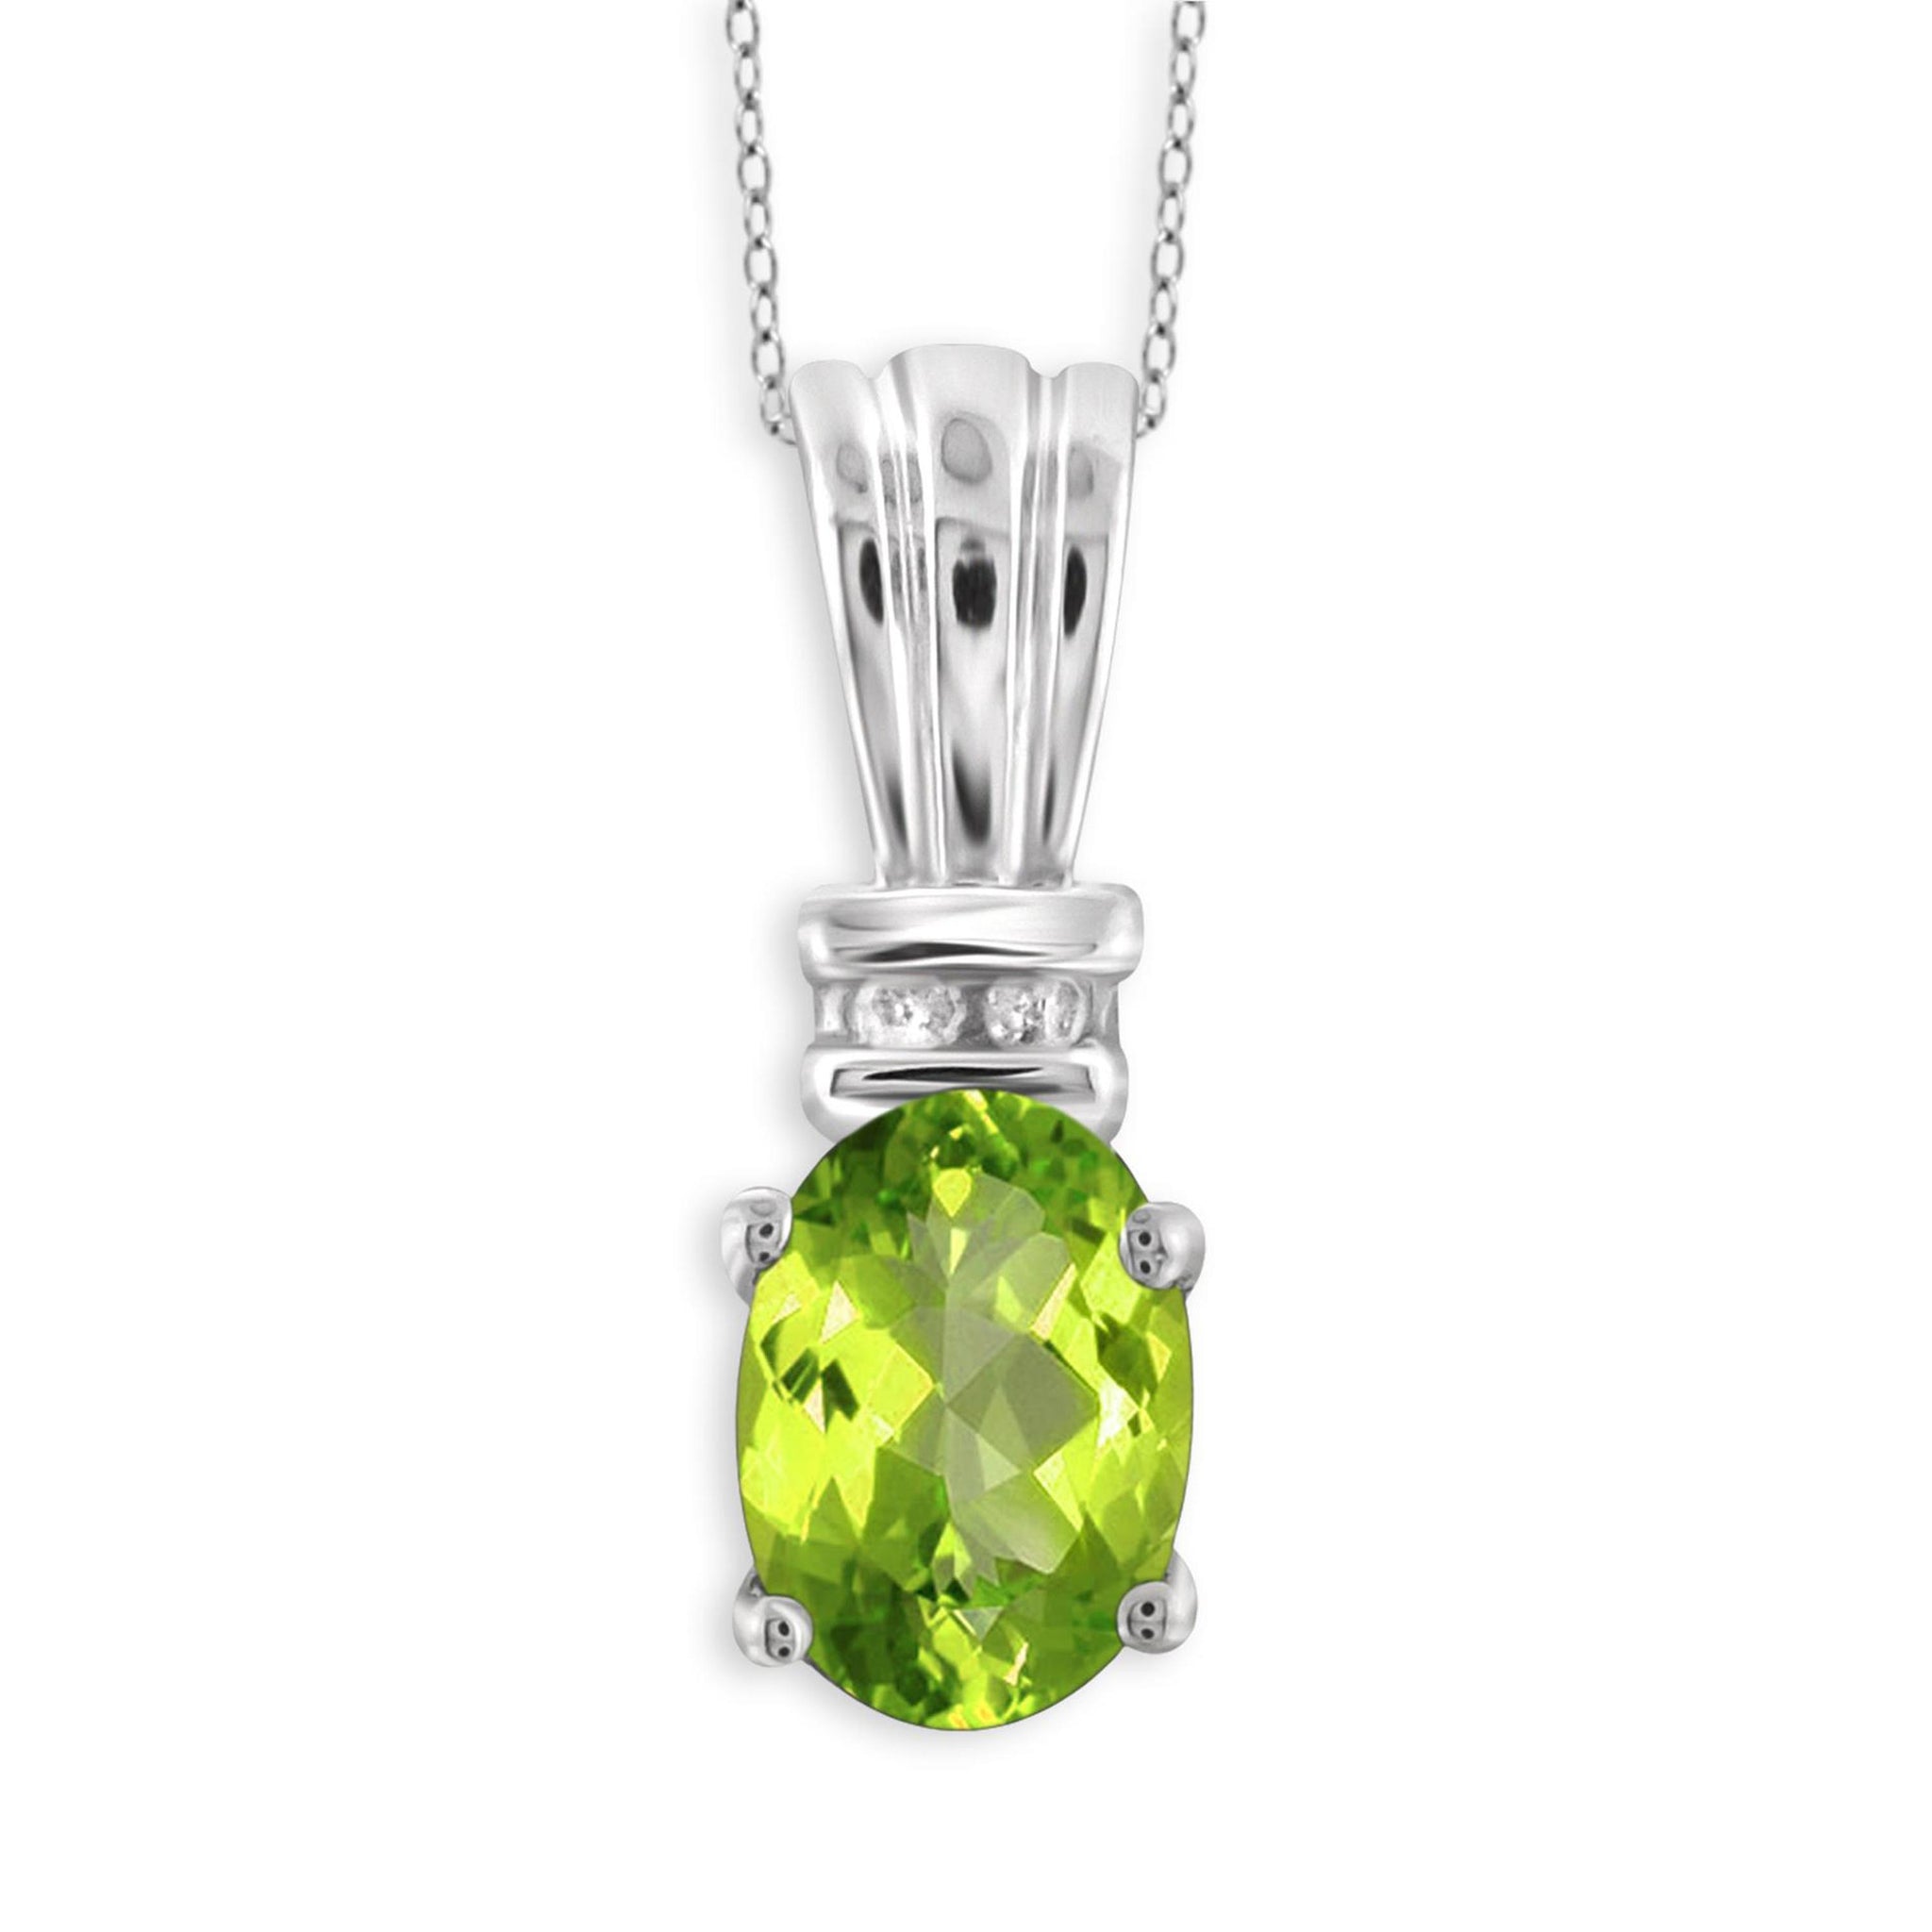 JewelonFire 3/4 Carat T.G.W. Peridot And 1/20 Carat T.W. White Diamond Sterling Silver Pendant - Assorted Colors